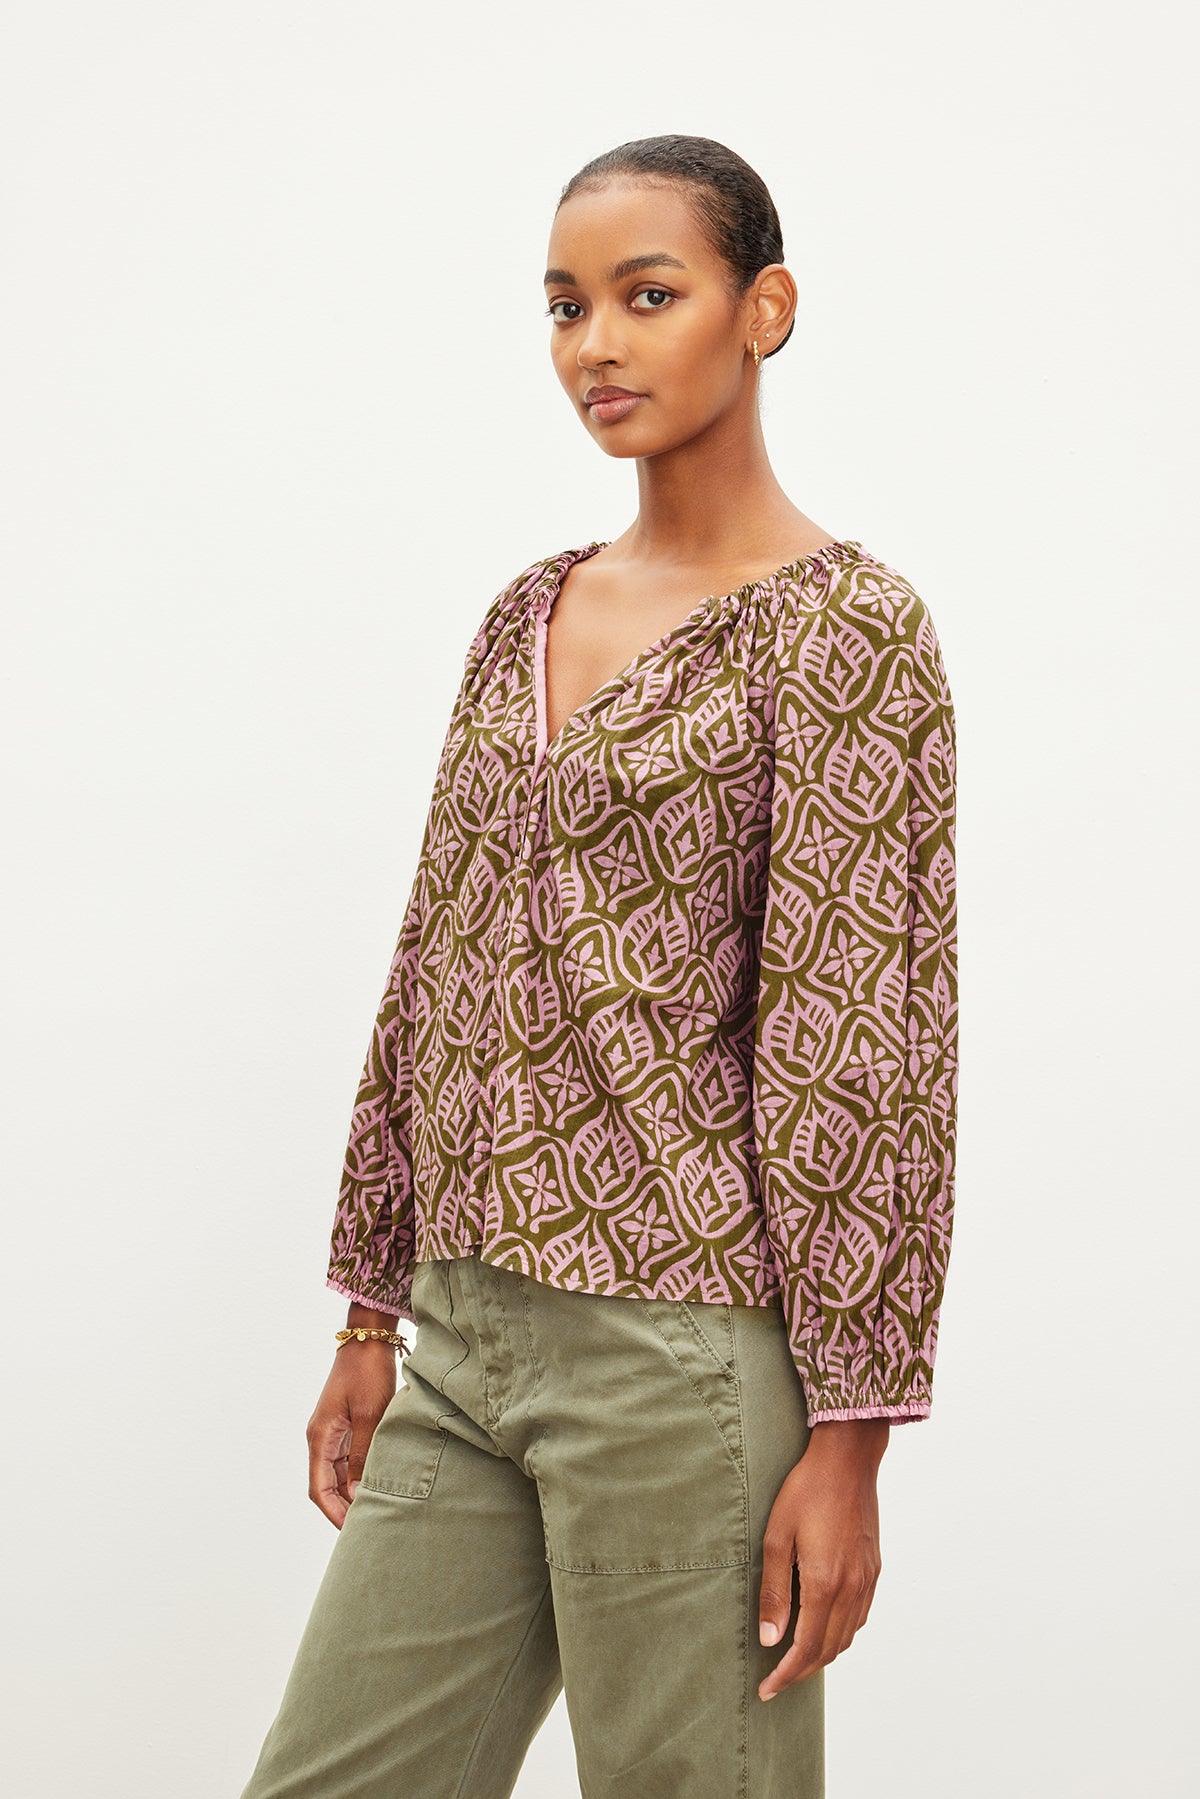 The model is wearing an MARIAN PRINTED BUTTON FRONT TOP by Velvet by Graham & Spencer, an olive green top with a v-neckline.-35967584370881